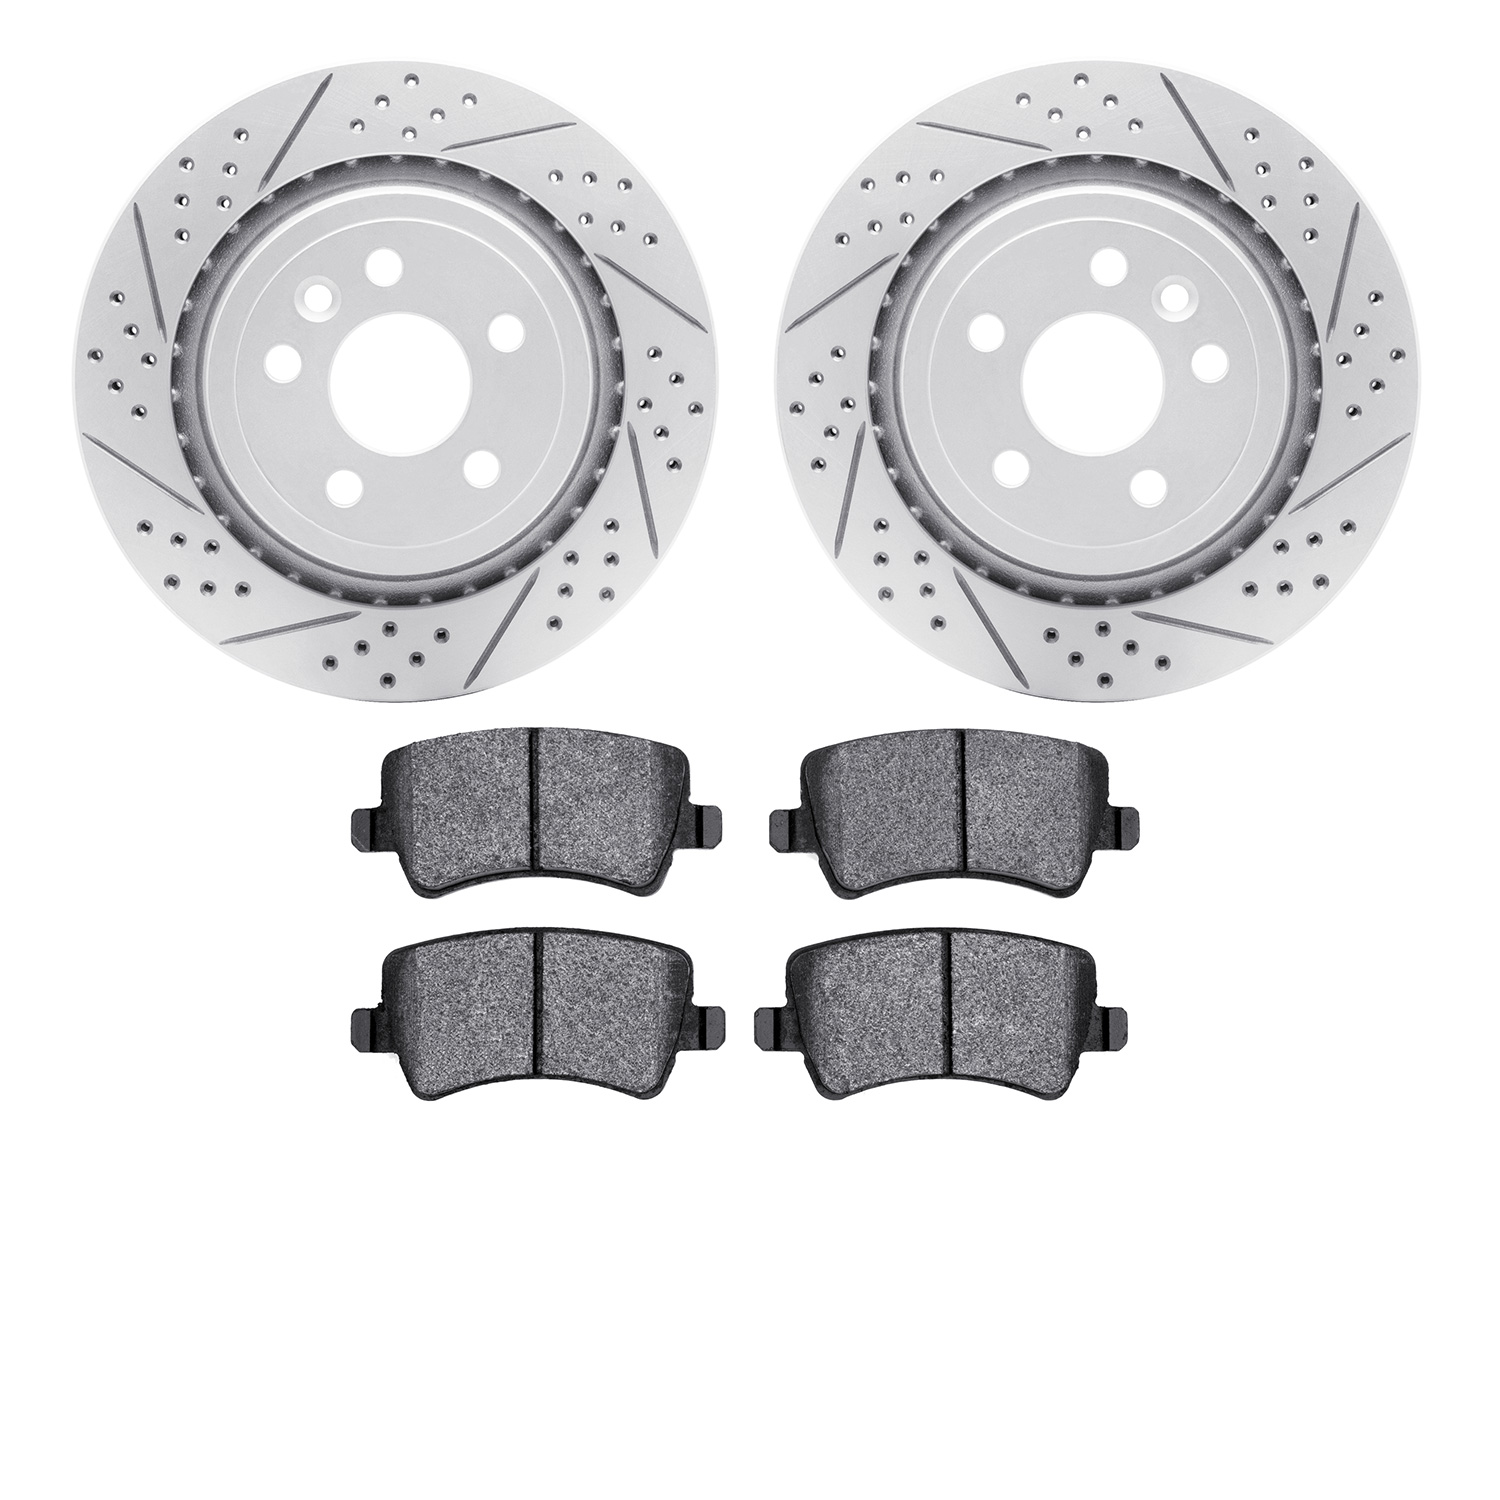 2602-27059 Geoperformance Drilled/Slotted Rotors w/5000 Euro Ceramic Brake Pads Kit, 2007-2015 Volvo, Position: Rear